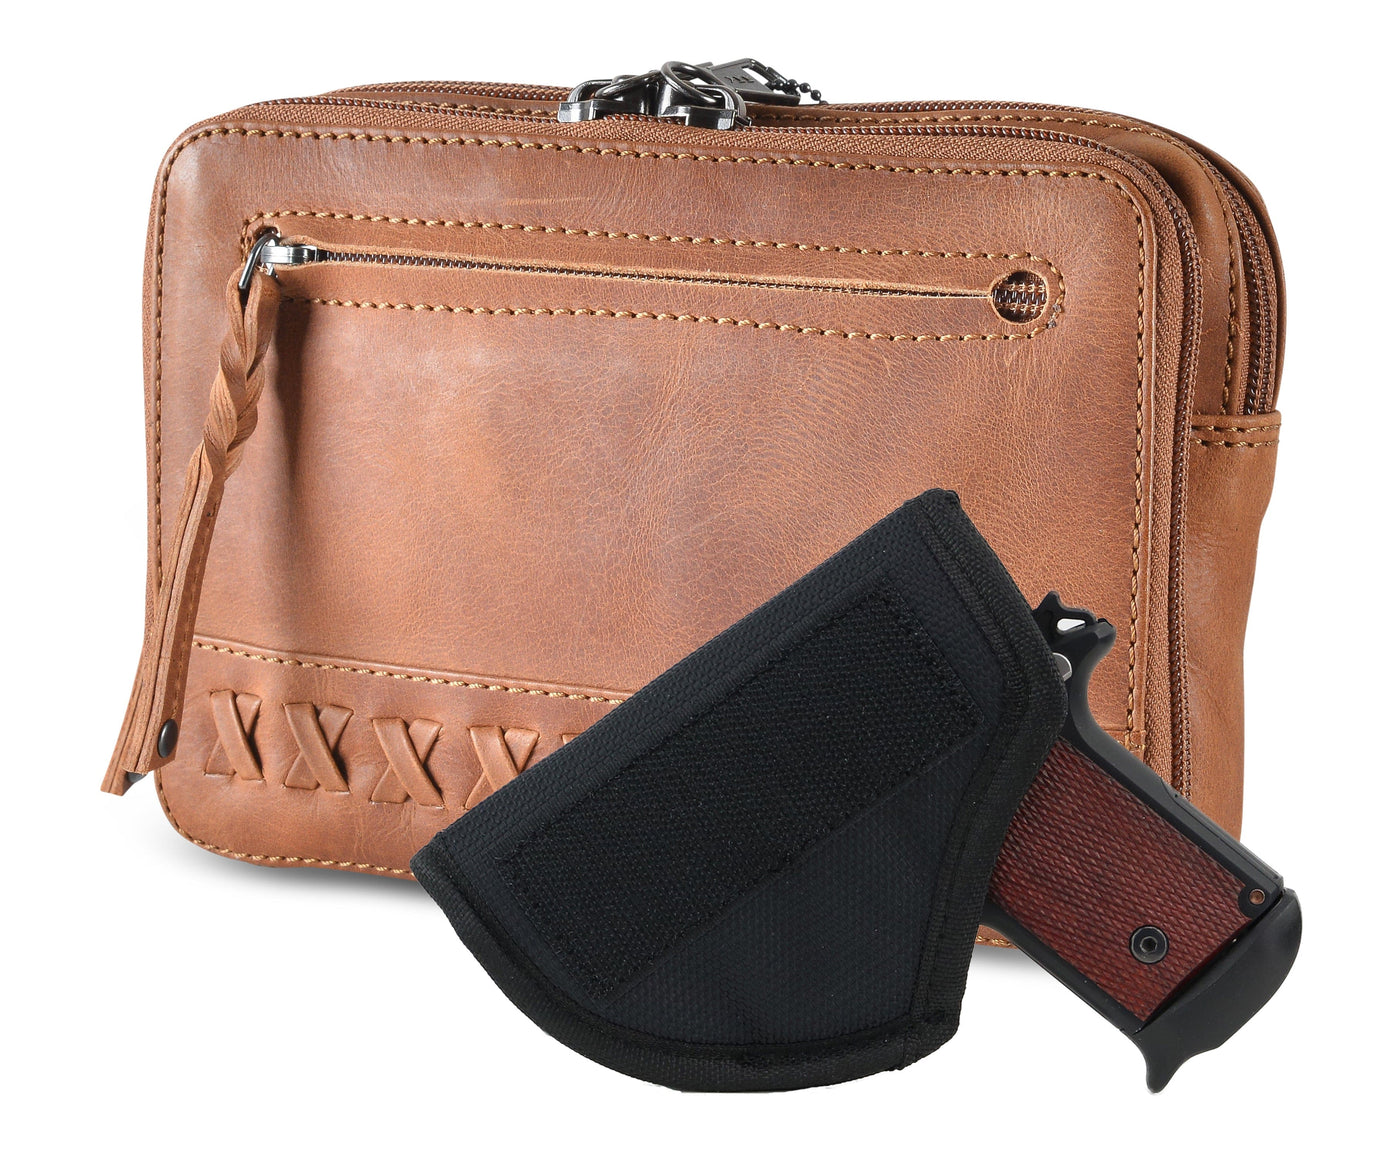 Concealed Carry Kailey Leather Purse Pack - Lady Conceal - Concealed Carry Purse - Lady Conceal Brown